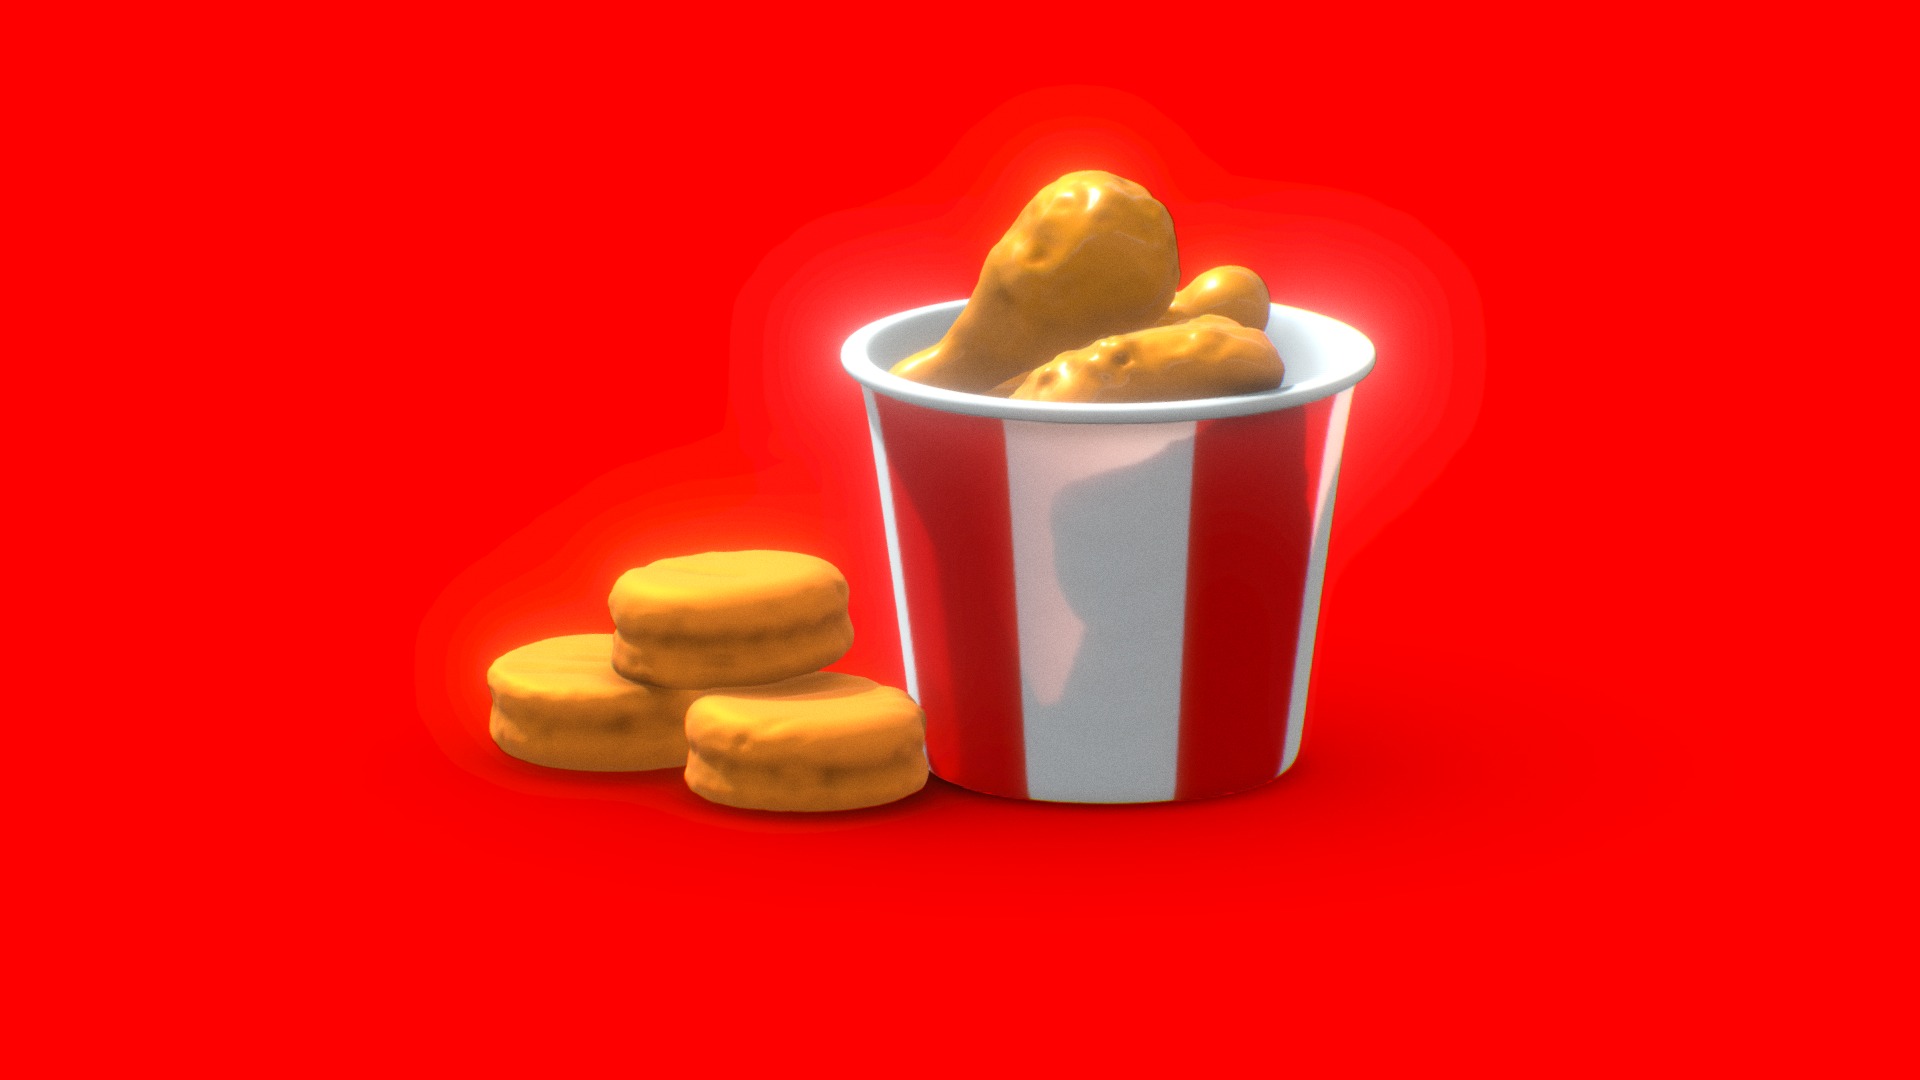 3D model FRIEDCHICKEN - This is a 3D model of the FRIEDCHICKEN. The 3D model is about a red and white box with a gold ball in it.